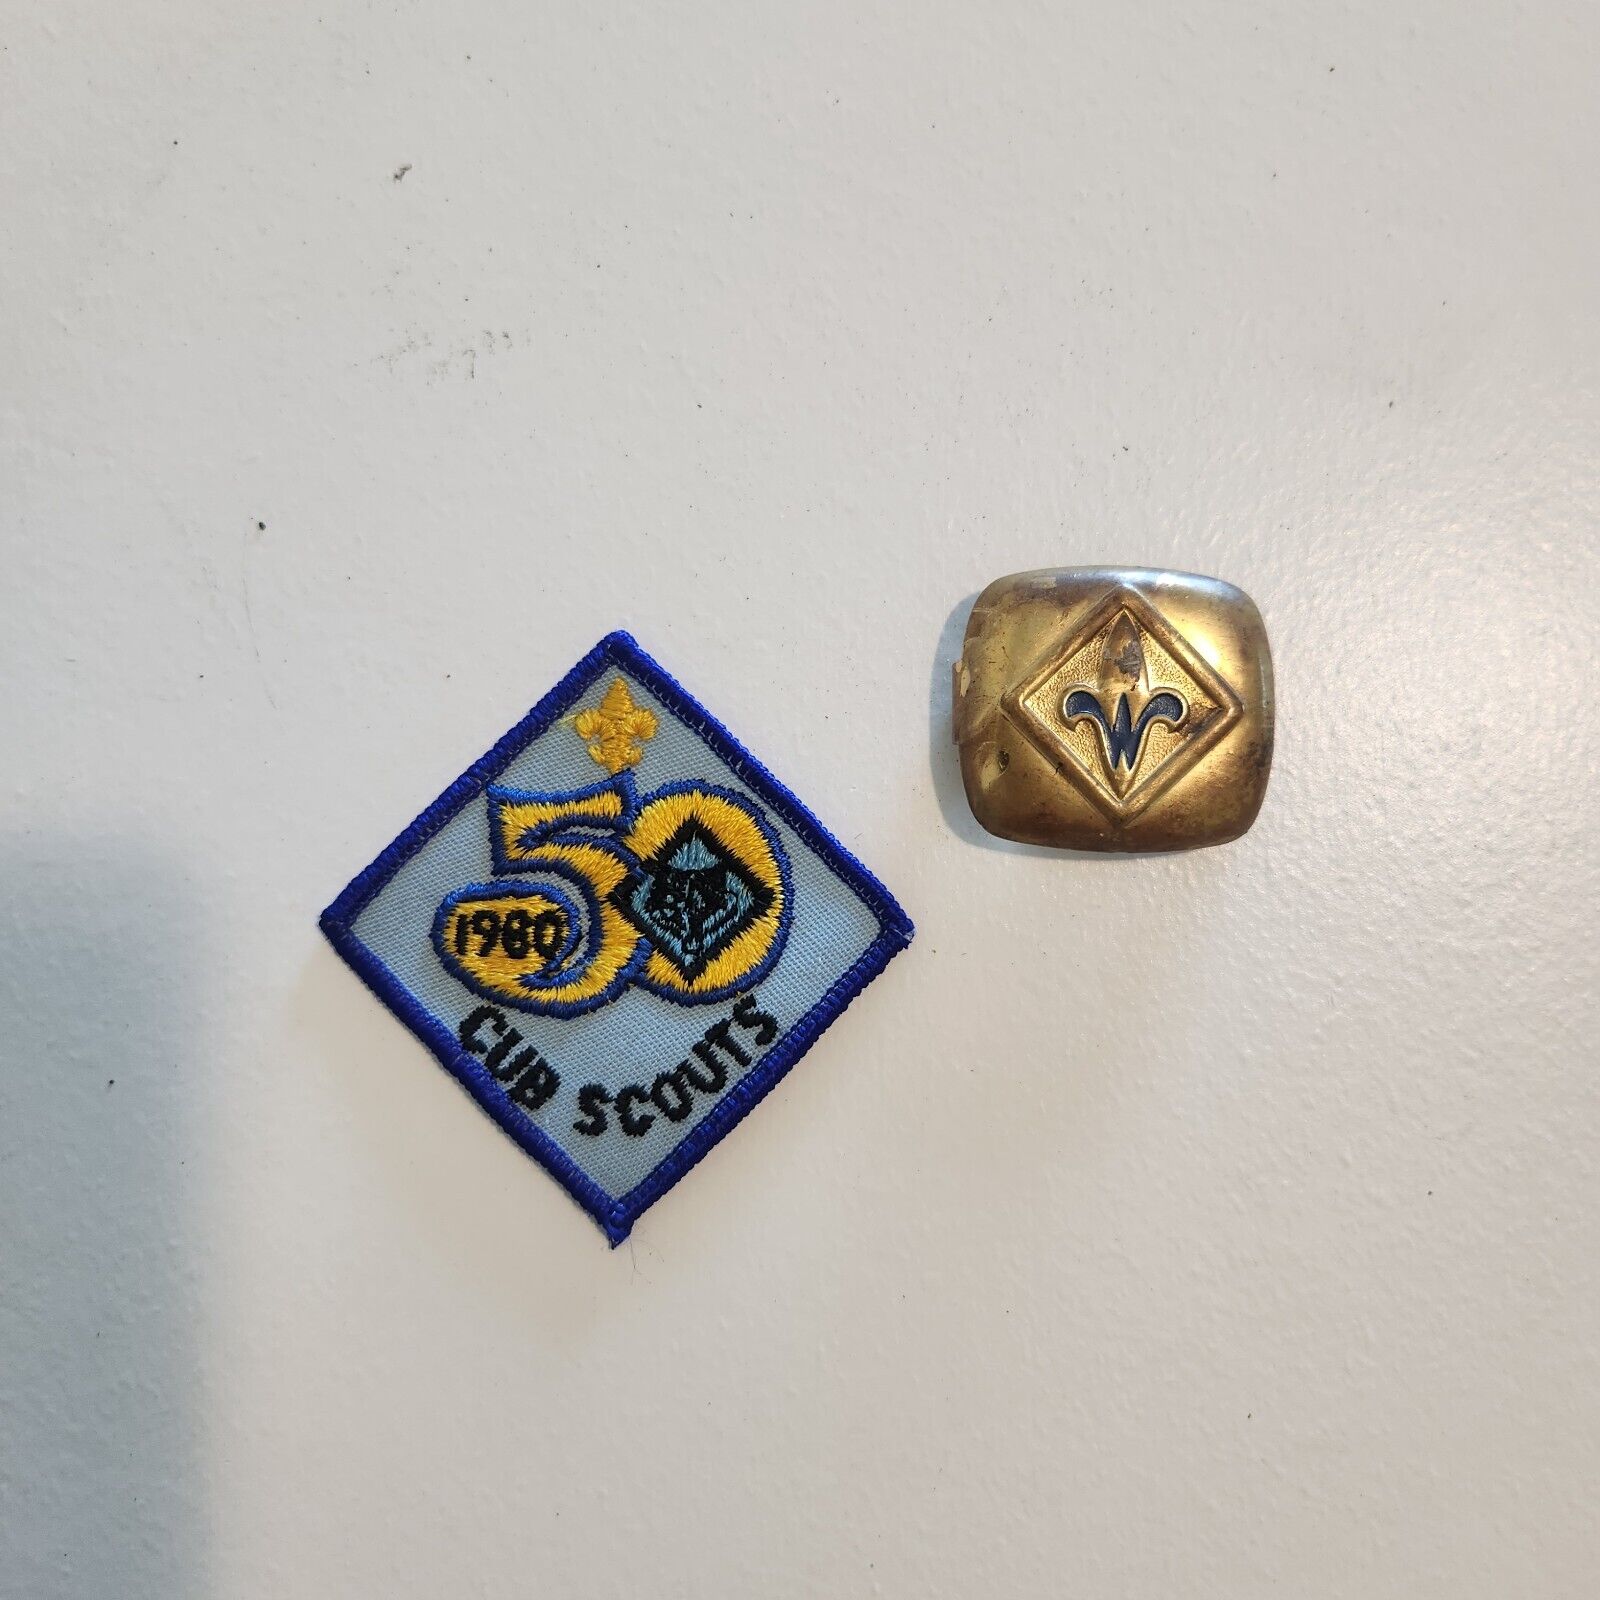 Vintage Cub Scouts 50th Anniversary Patch 1980 And An Old Neckerchief Slide